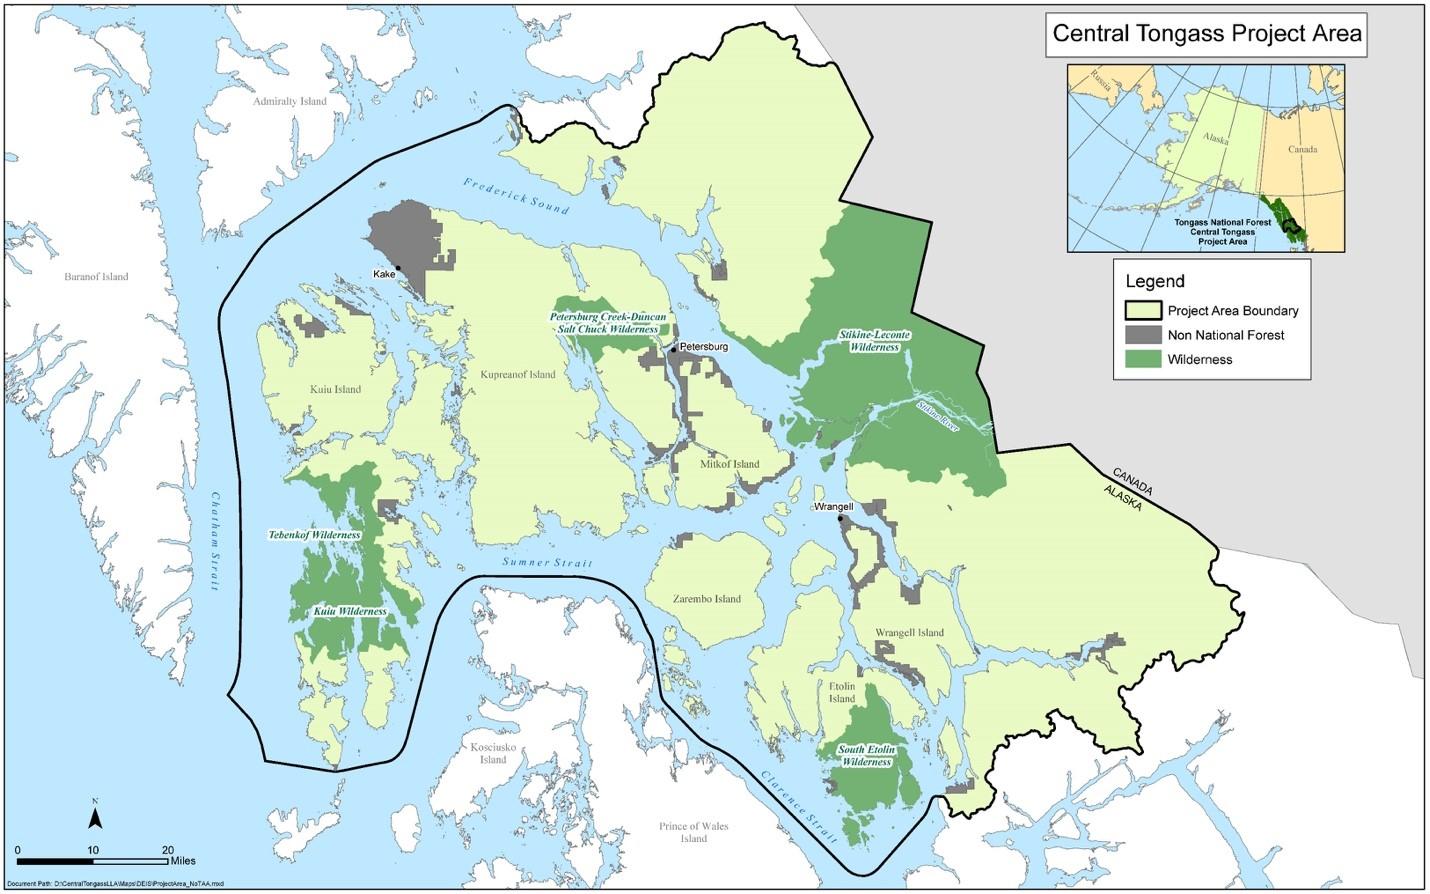 Central Tongass Project Area